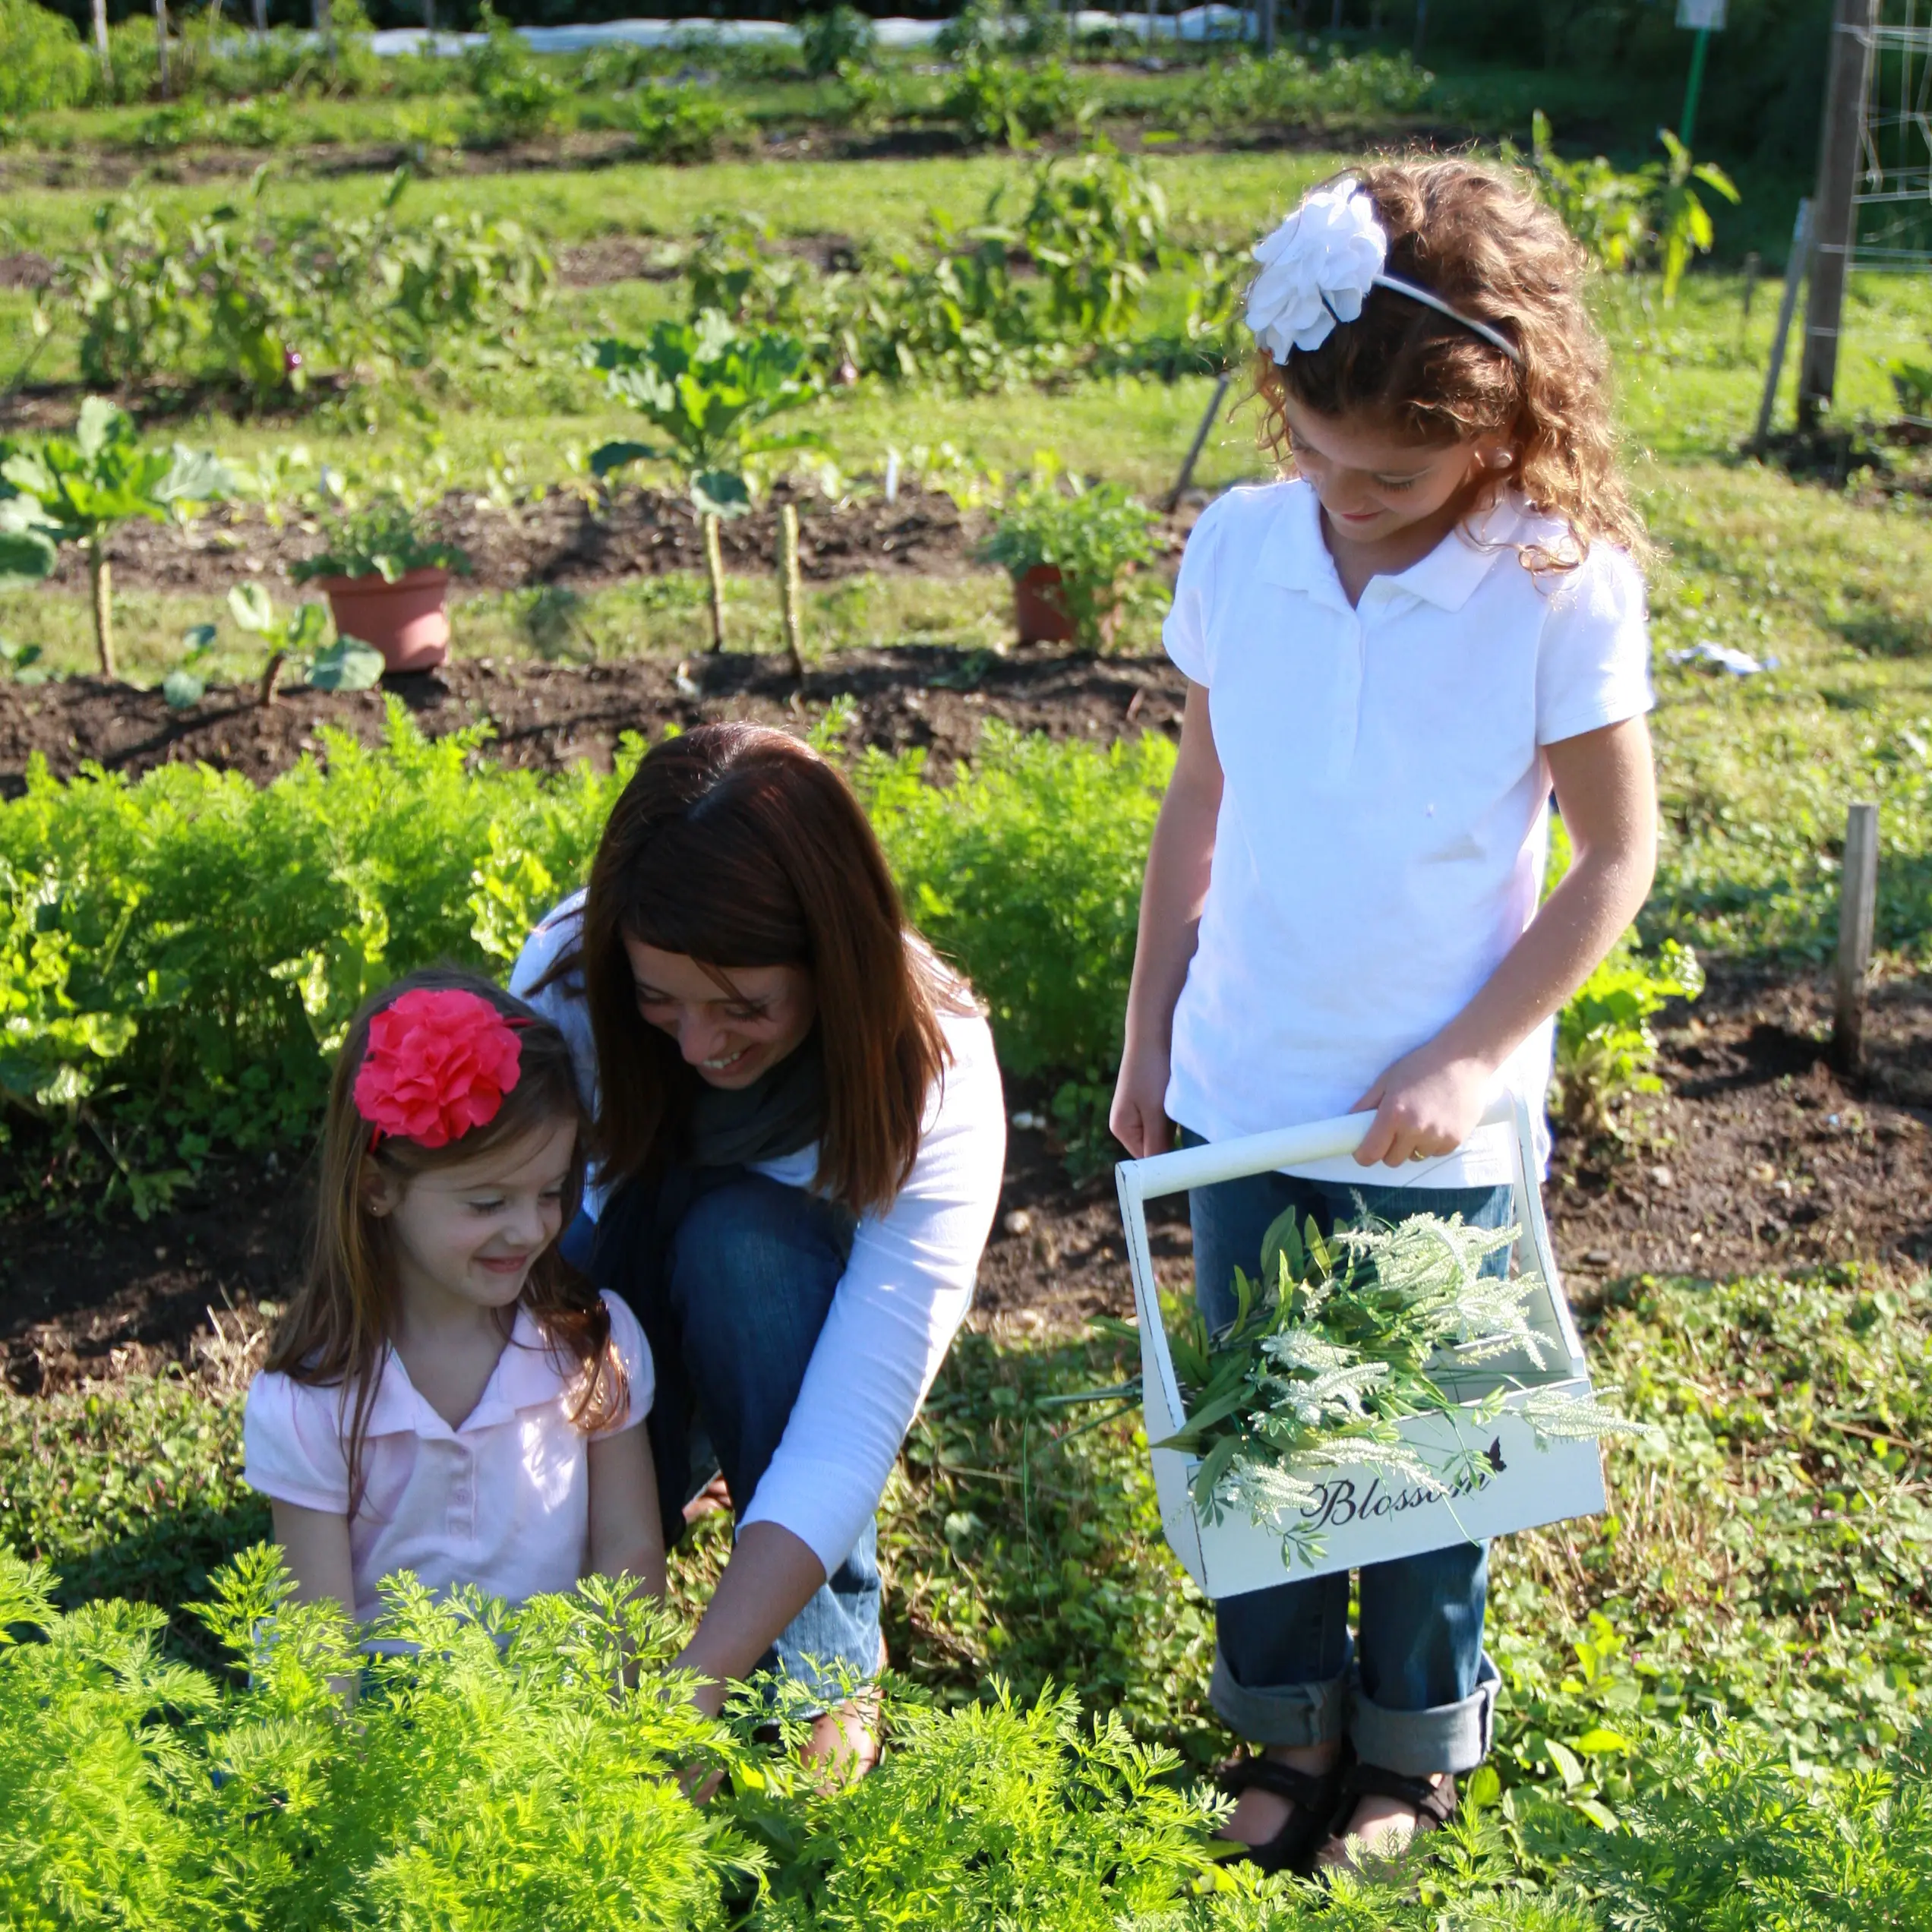 Culinary Therapy founder Lisa Gatti picks carrots with her daughters in their vegetable garden.